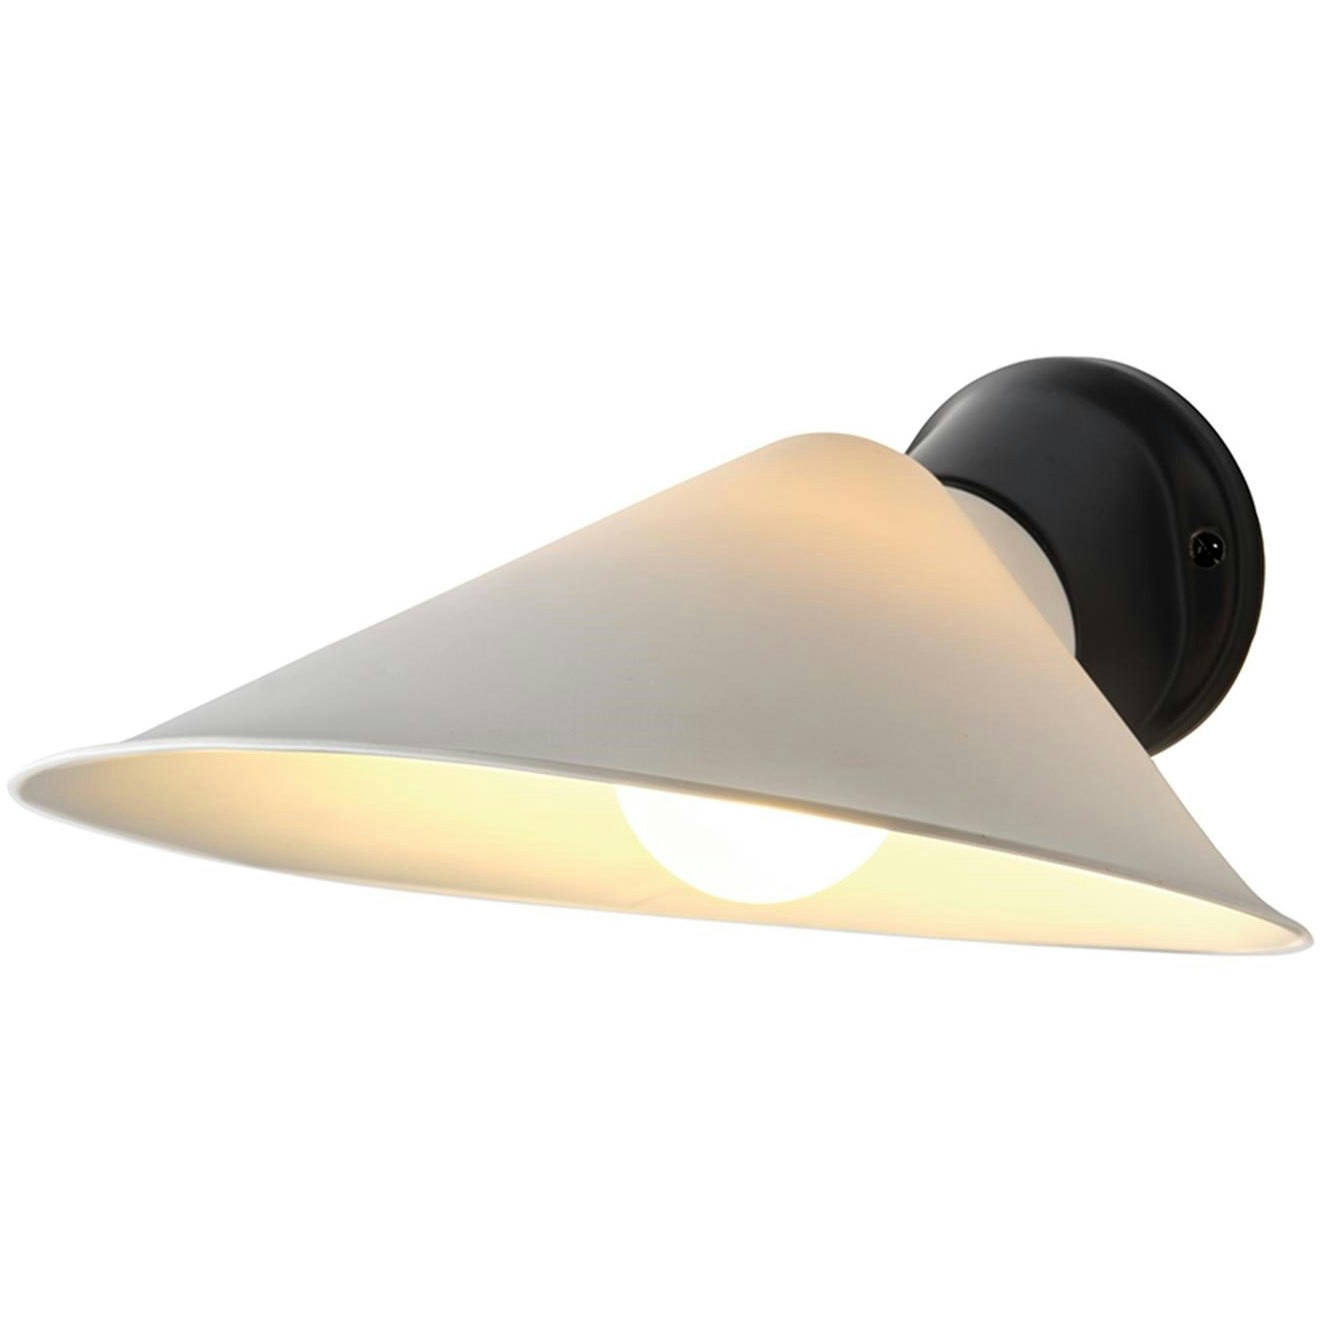 Plume Wall Lamp, Polycarbonate